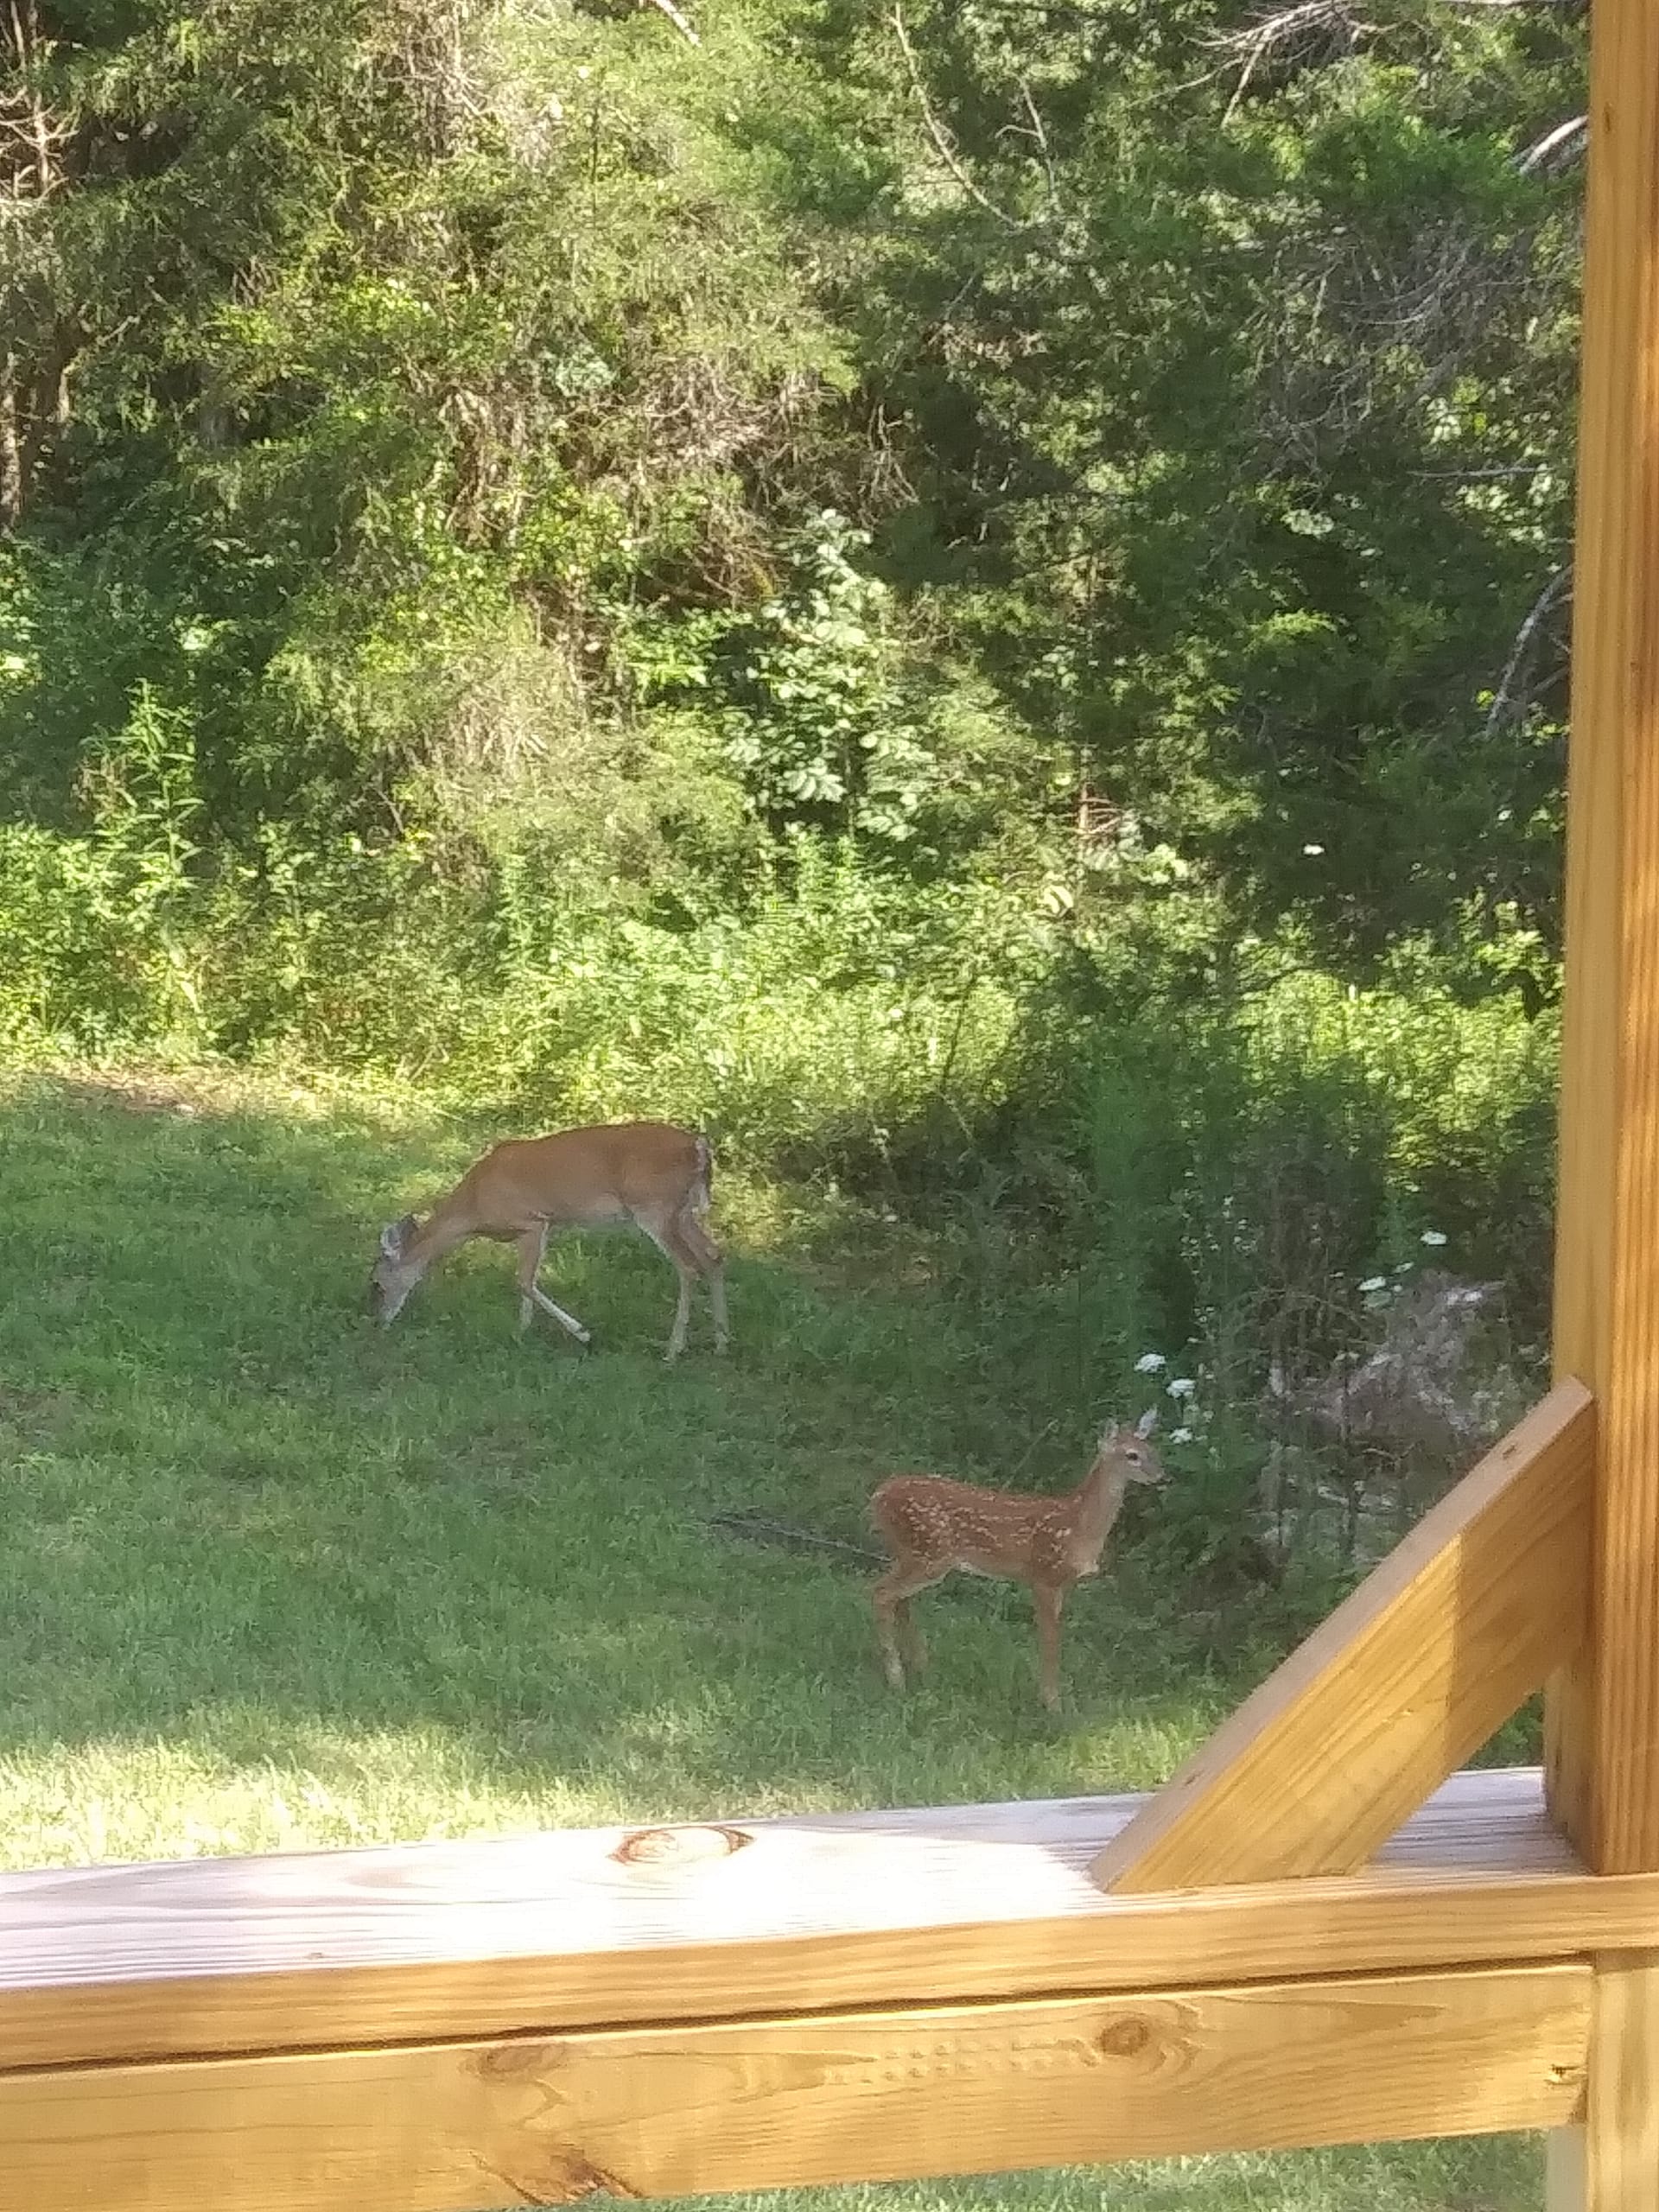 Neighbors stopped by to say hi